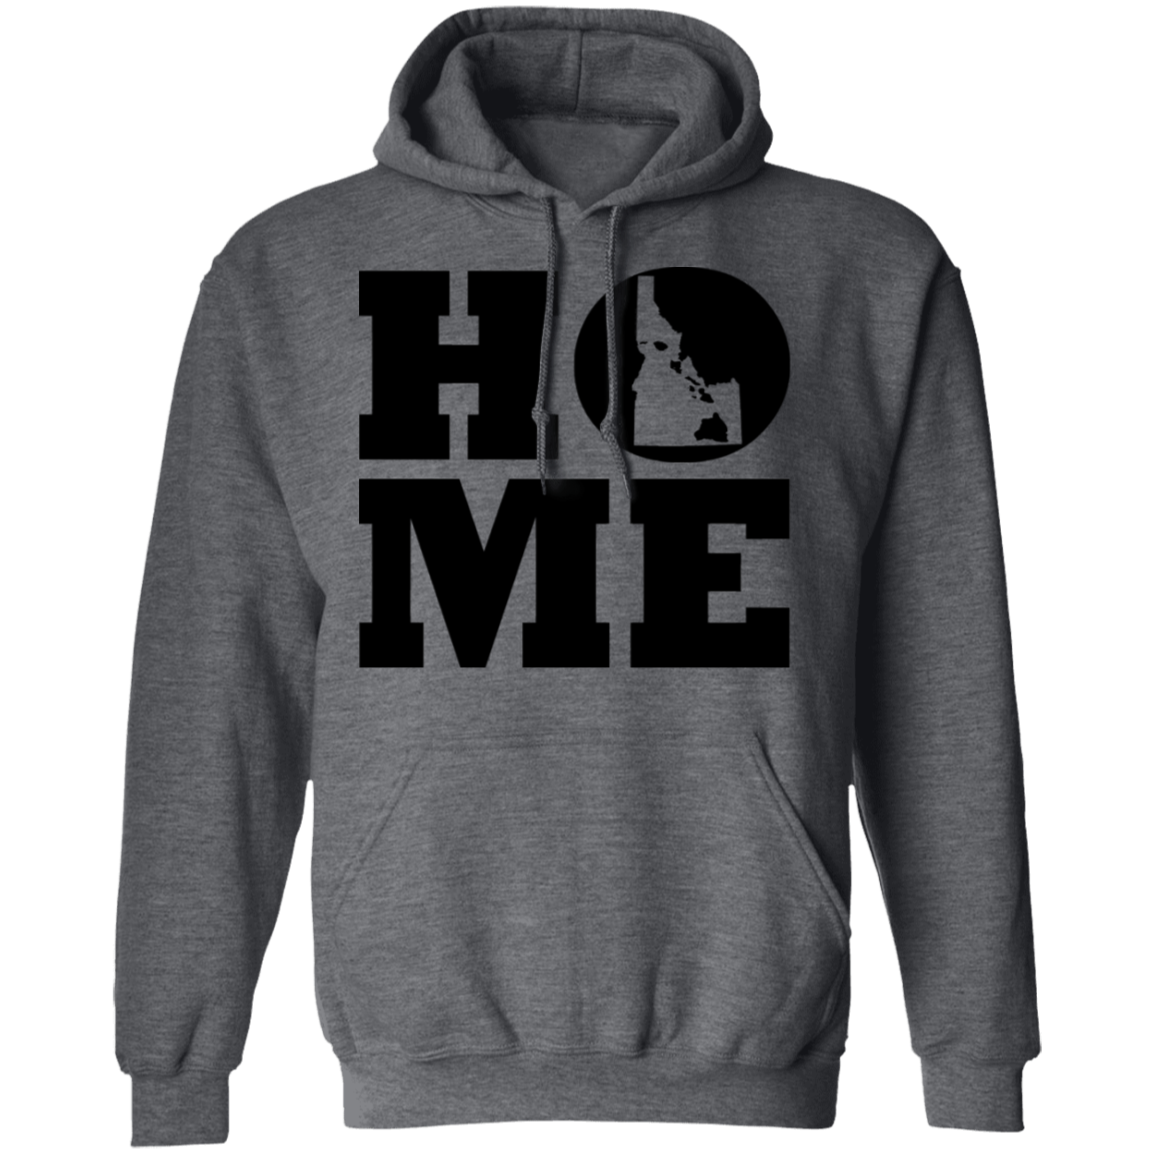 Home Roots Hawai'i and Idaho Pullover Hoodie